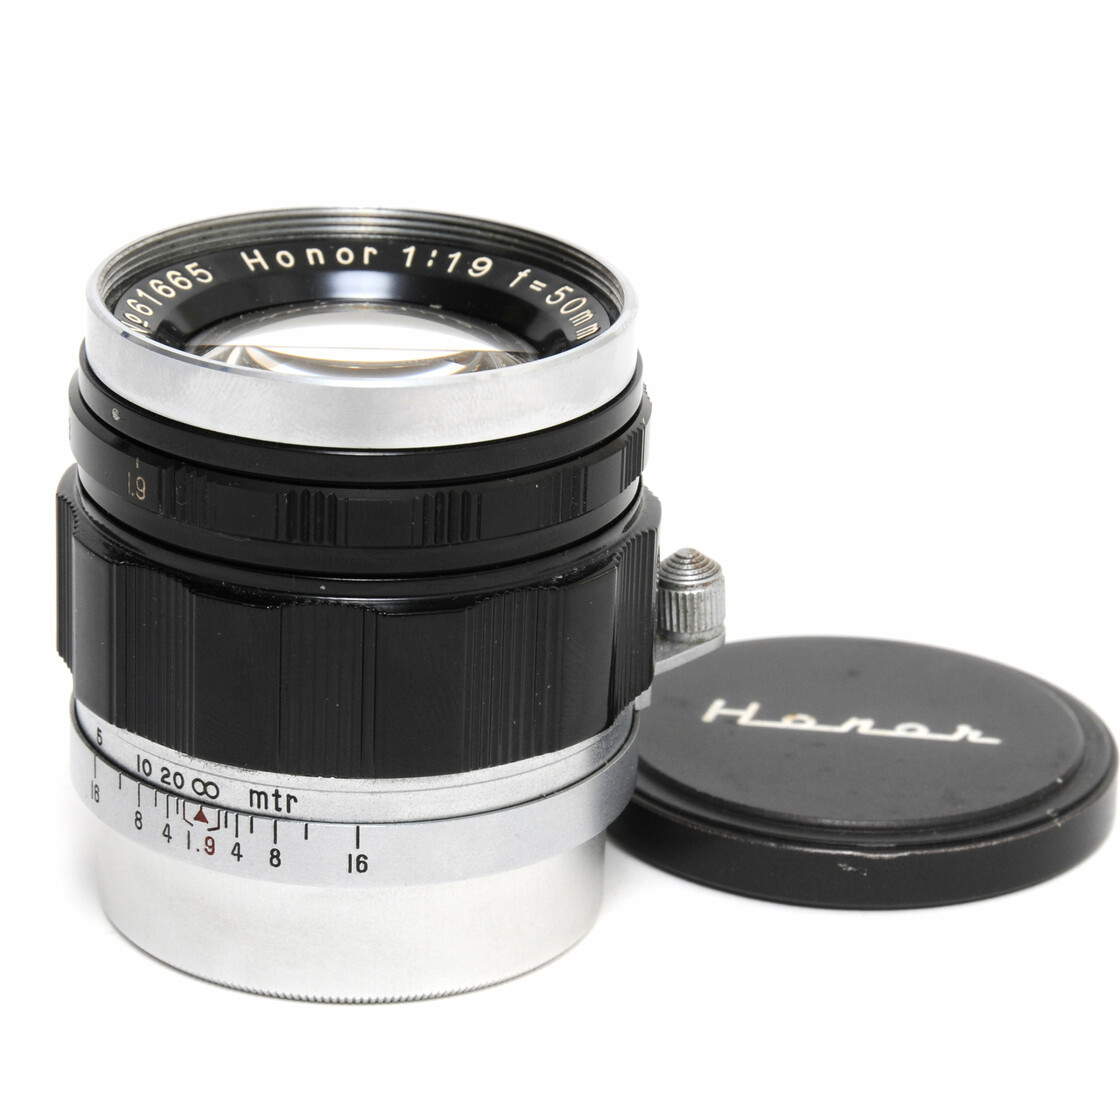 Zuiho Optical 1.9/50mm Honor Type 1. Rangefinder coupling for Leica